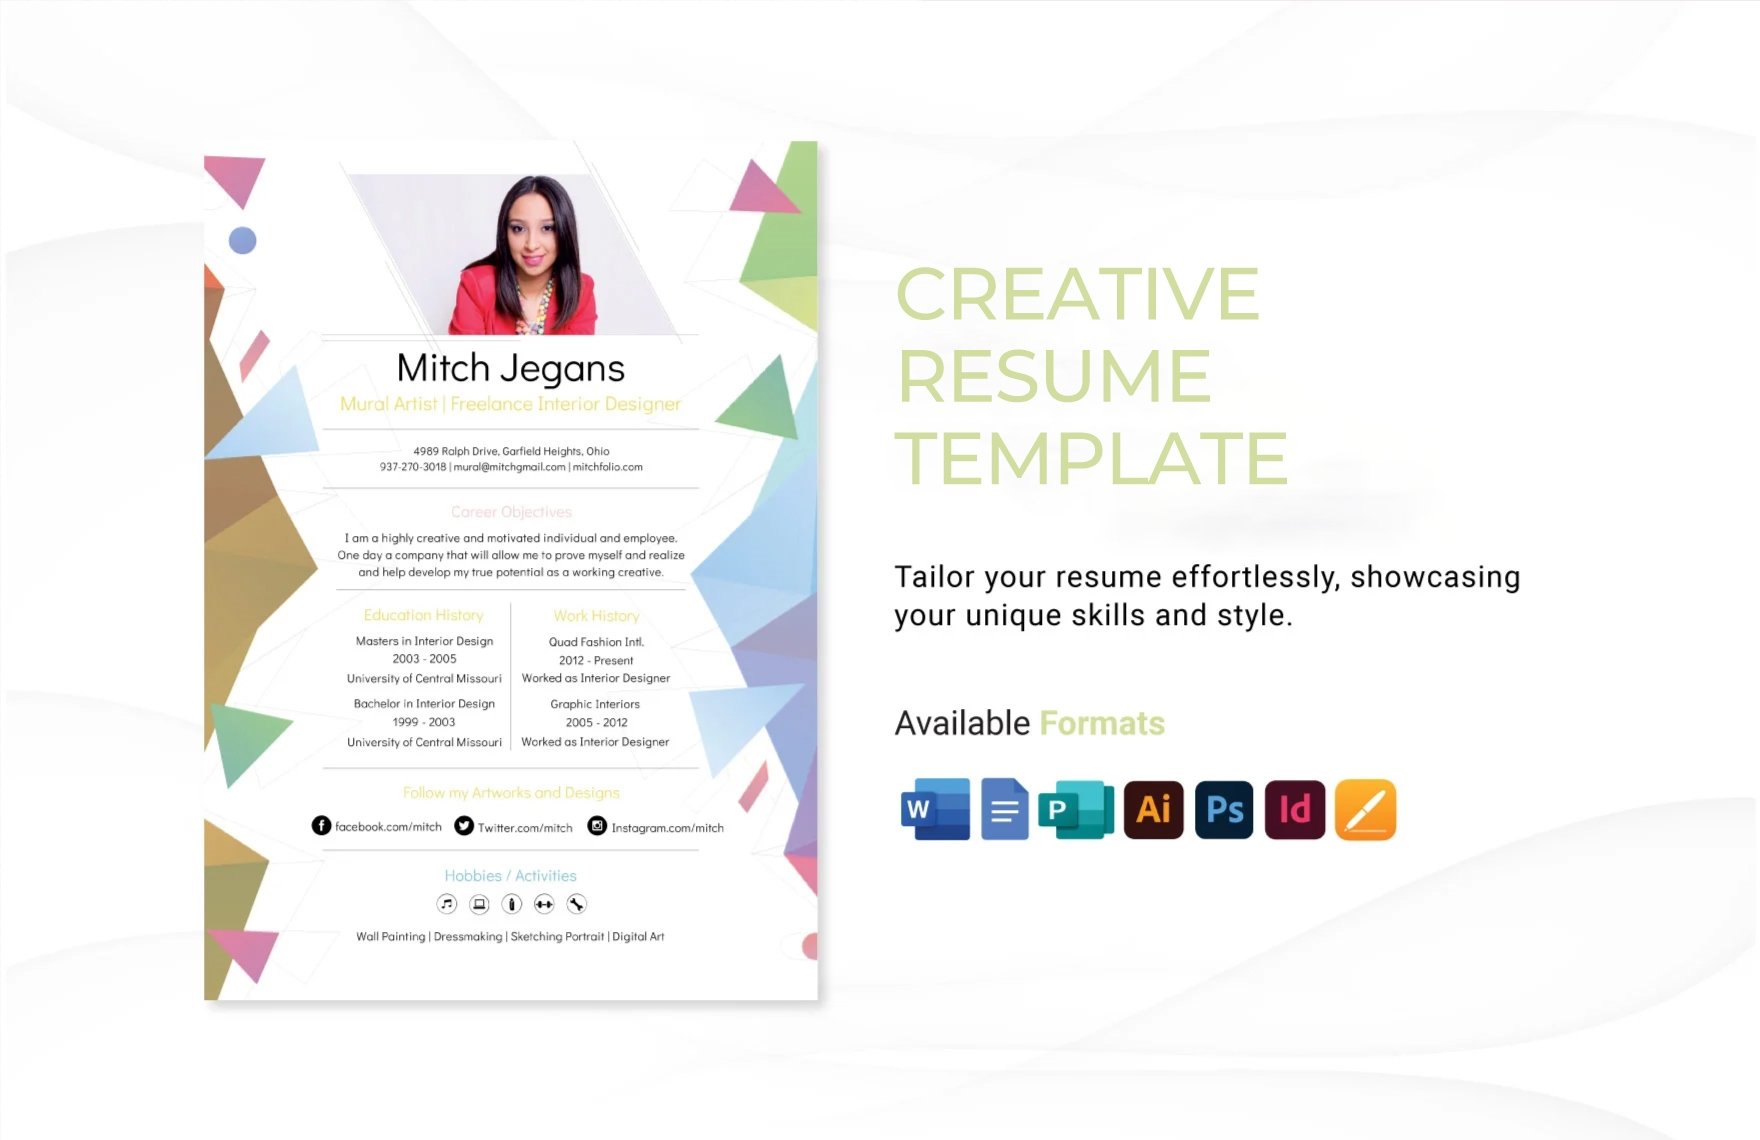 Creative Resume Template in Word, Illustrator, PSD, Apple Pages, Publisher, InDesign